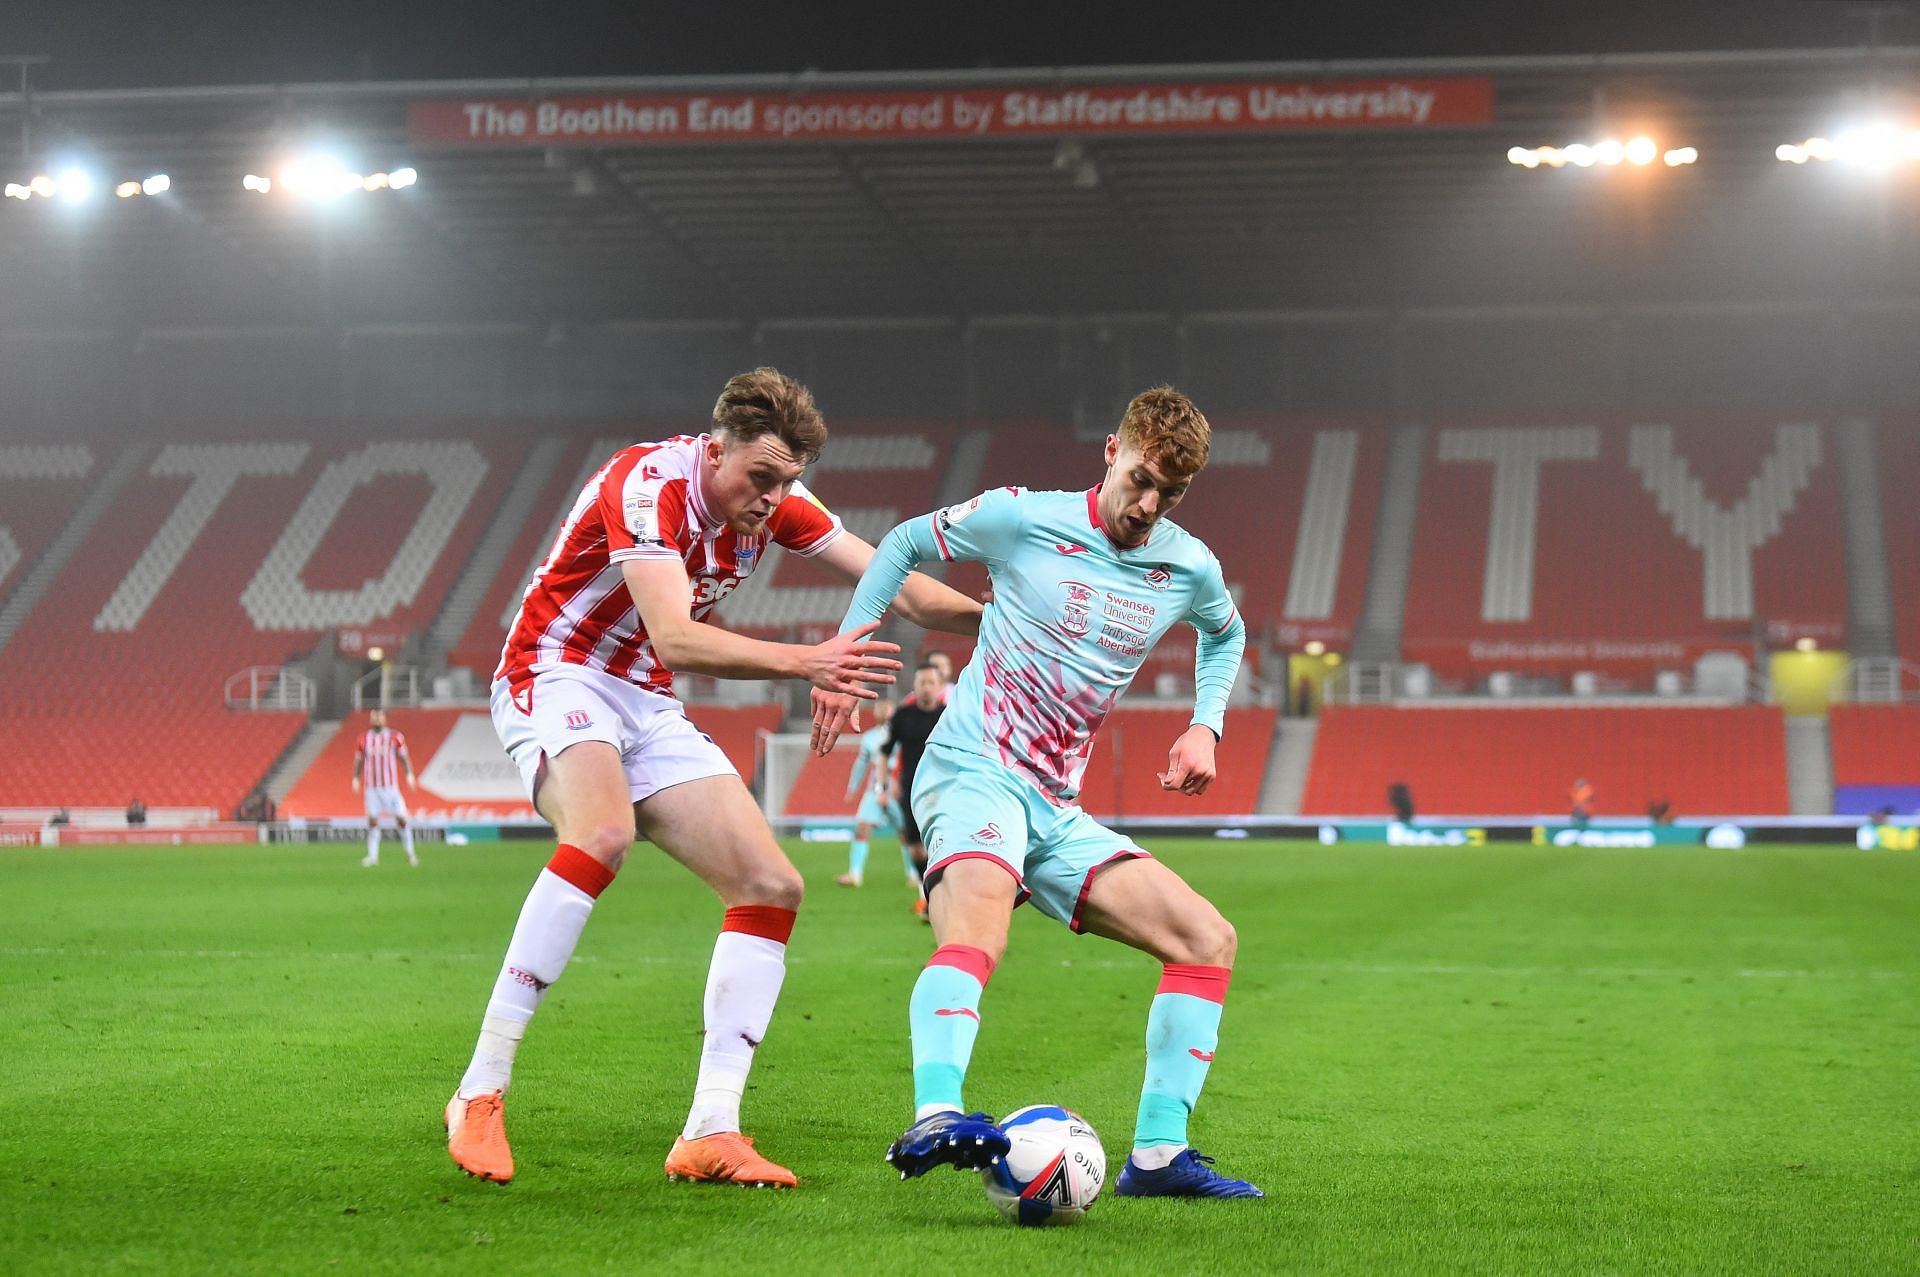 Stoke City play host to Swansea City on Tuesday